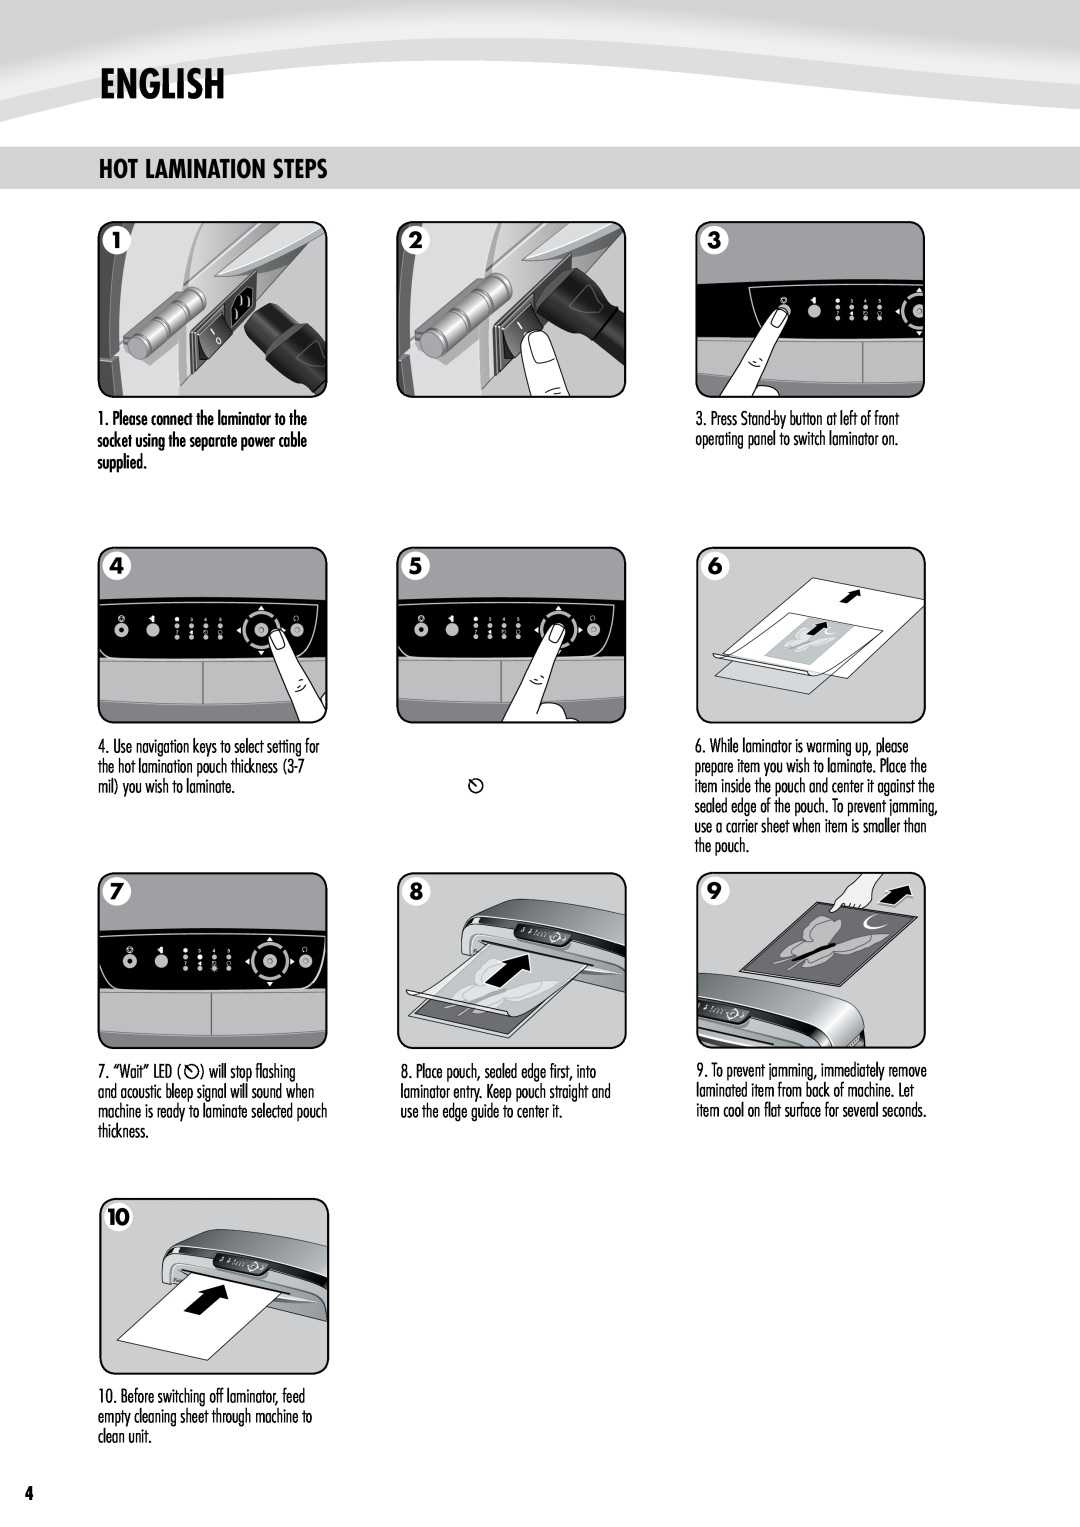 Fellowes 125 Hot Lamination Steps, English, Please connect the laminator to the, socket using the separate power cable 